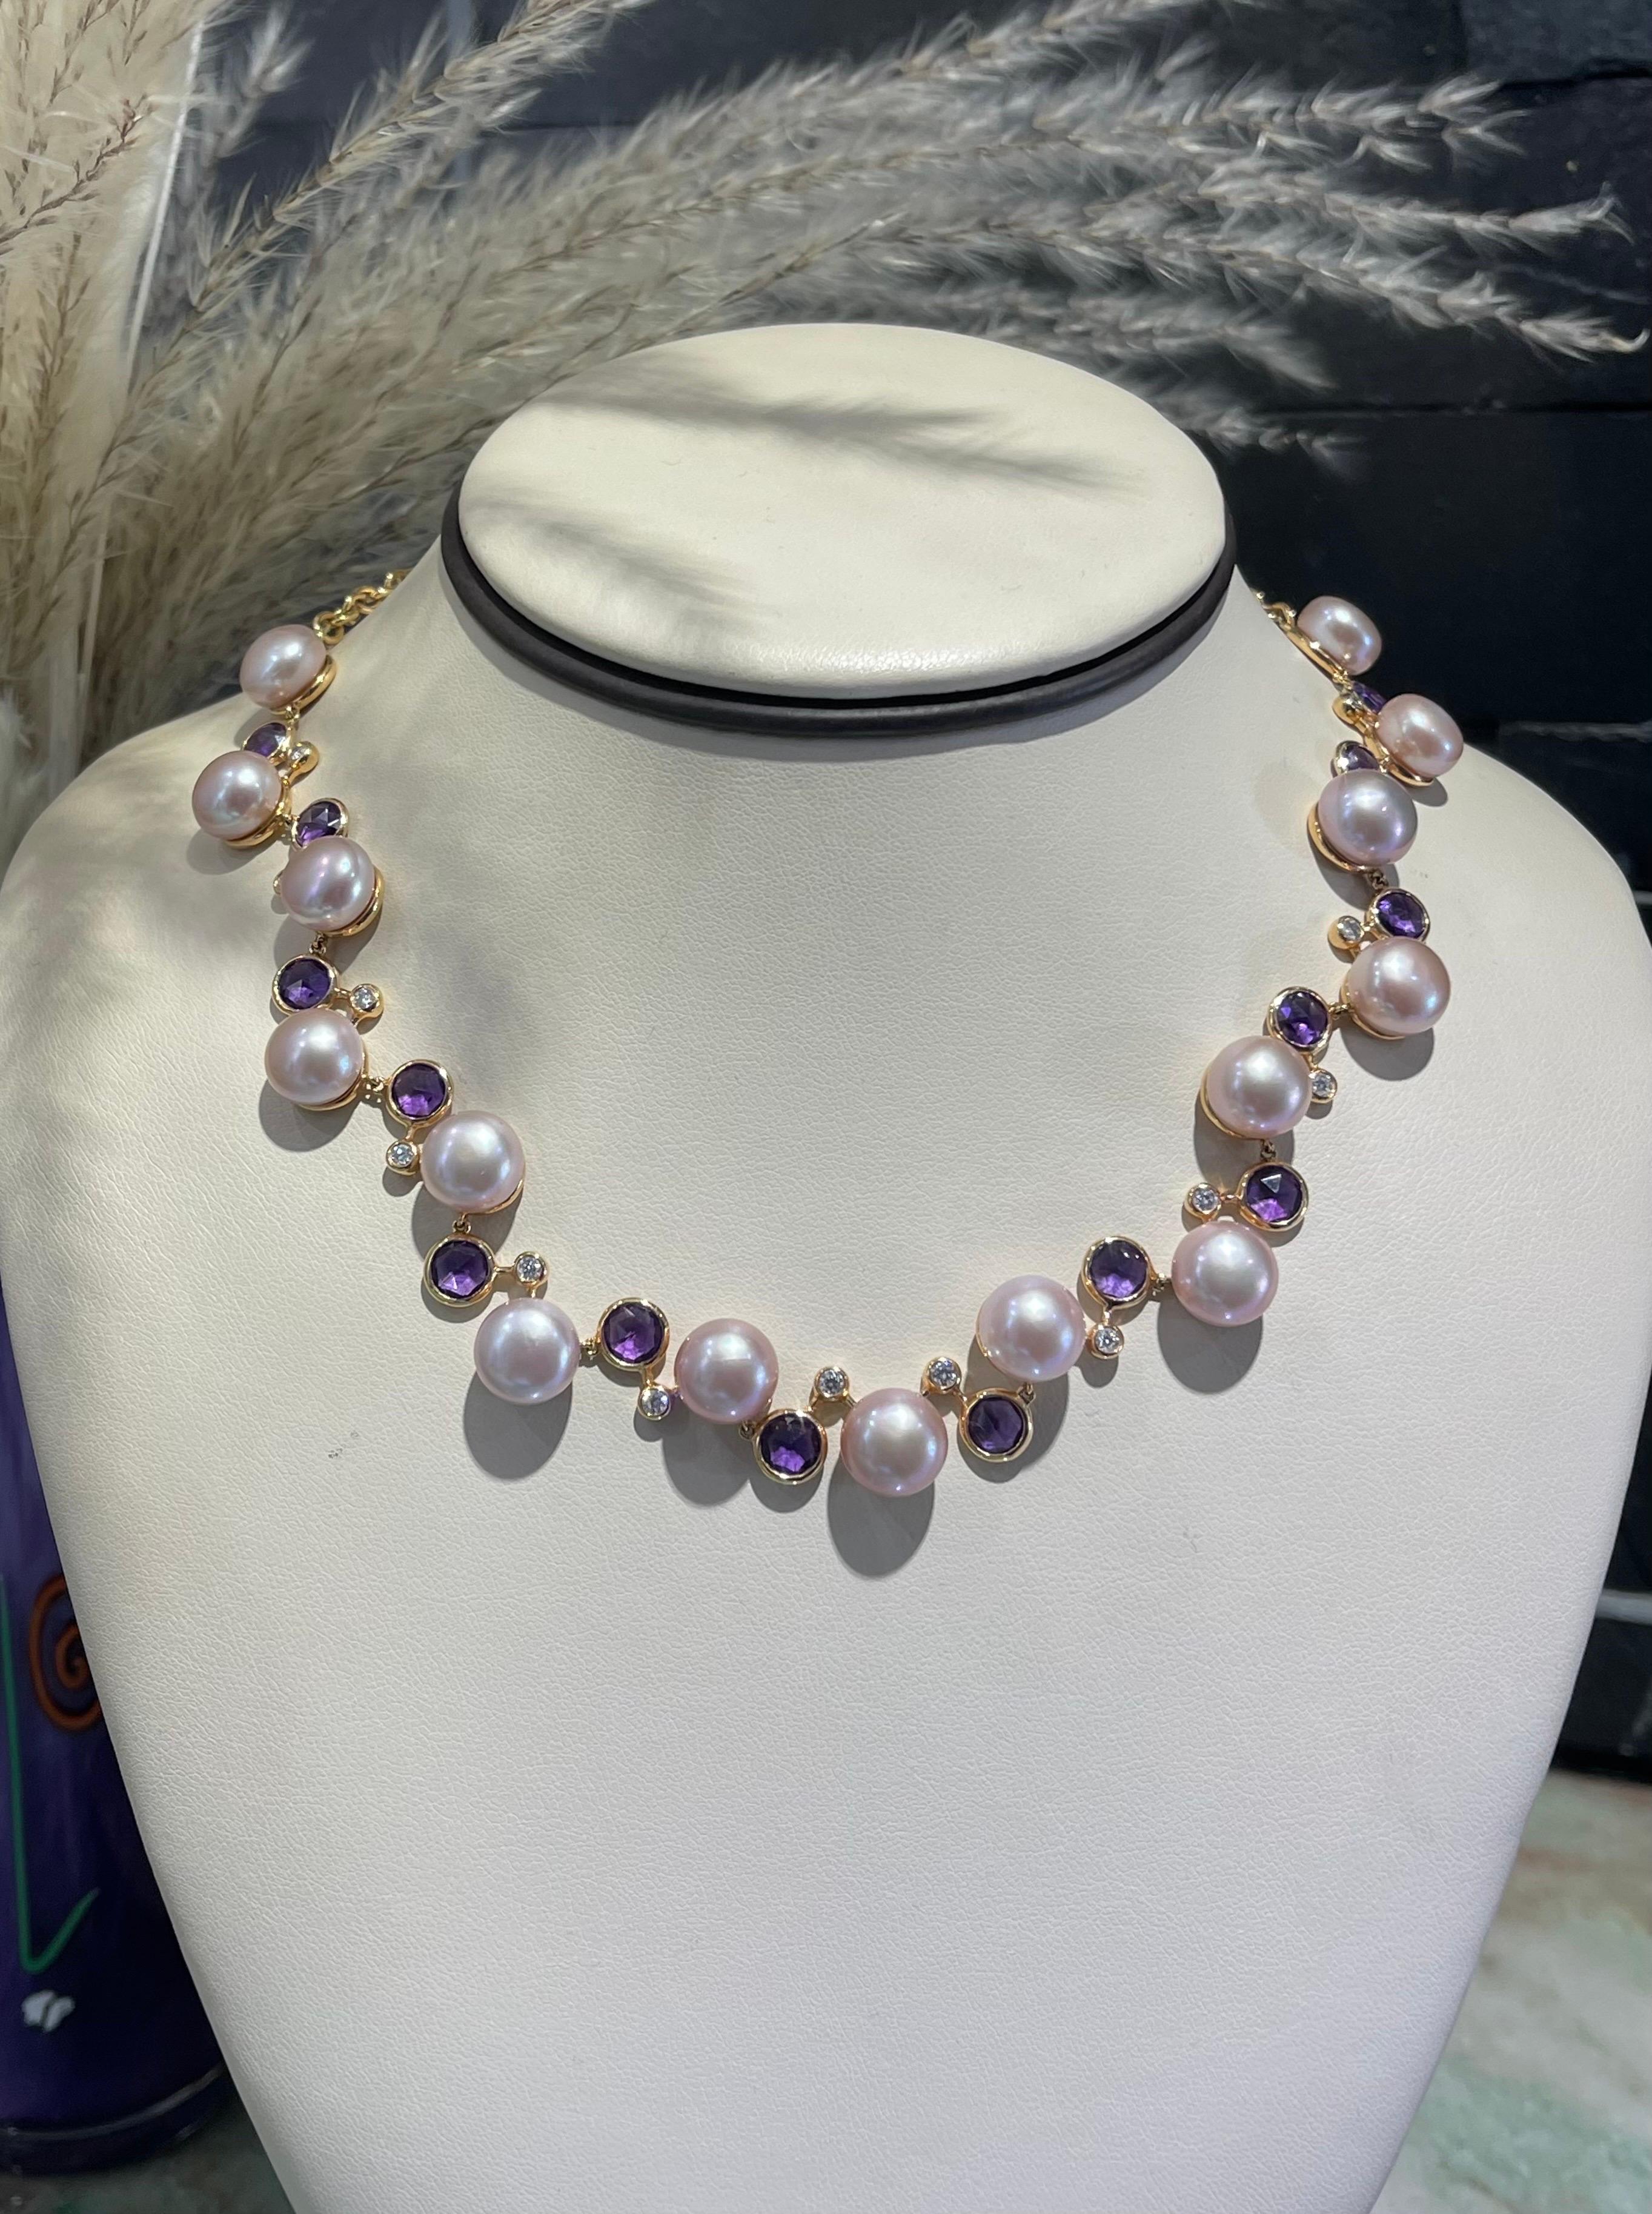 Gorgeous Pink Pearl, Amethyst And Diamond Necklace In 18k In Excellent Condition For Sale In Fort Lauderdale, FL